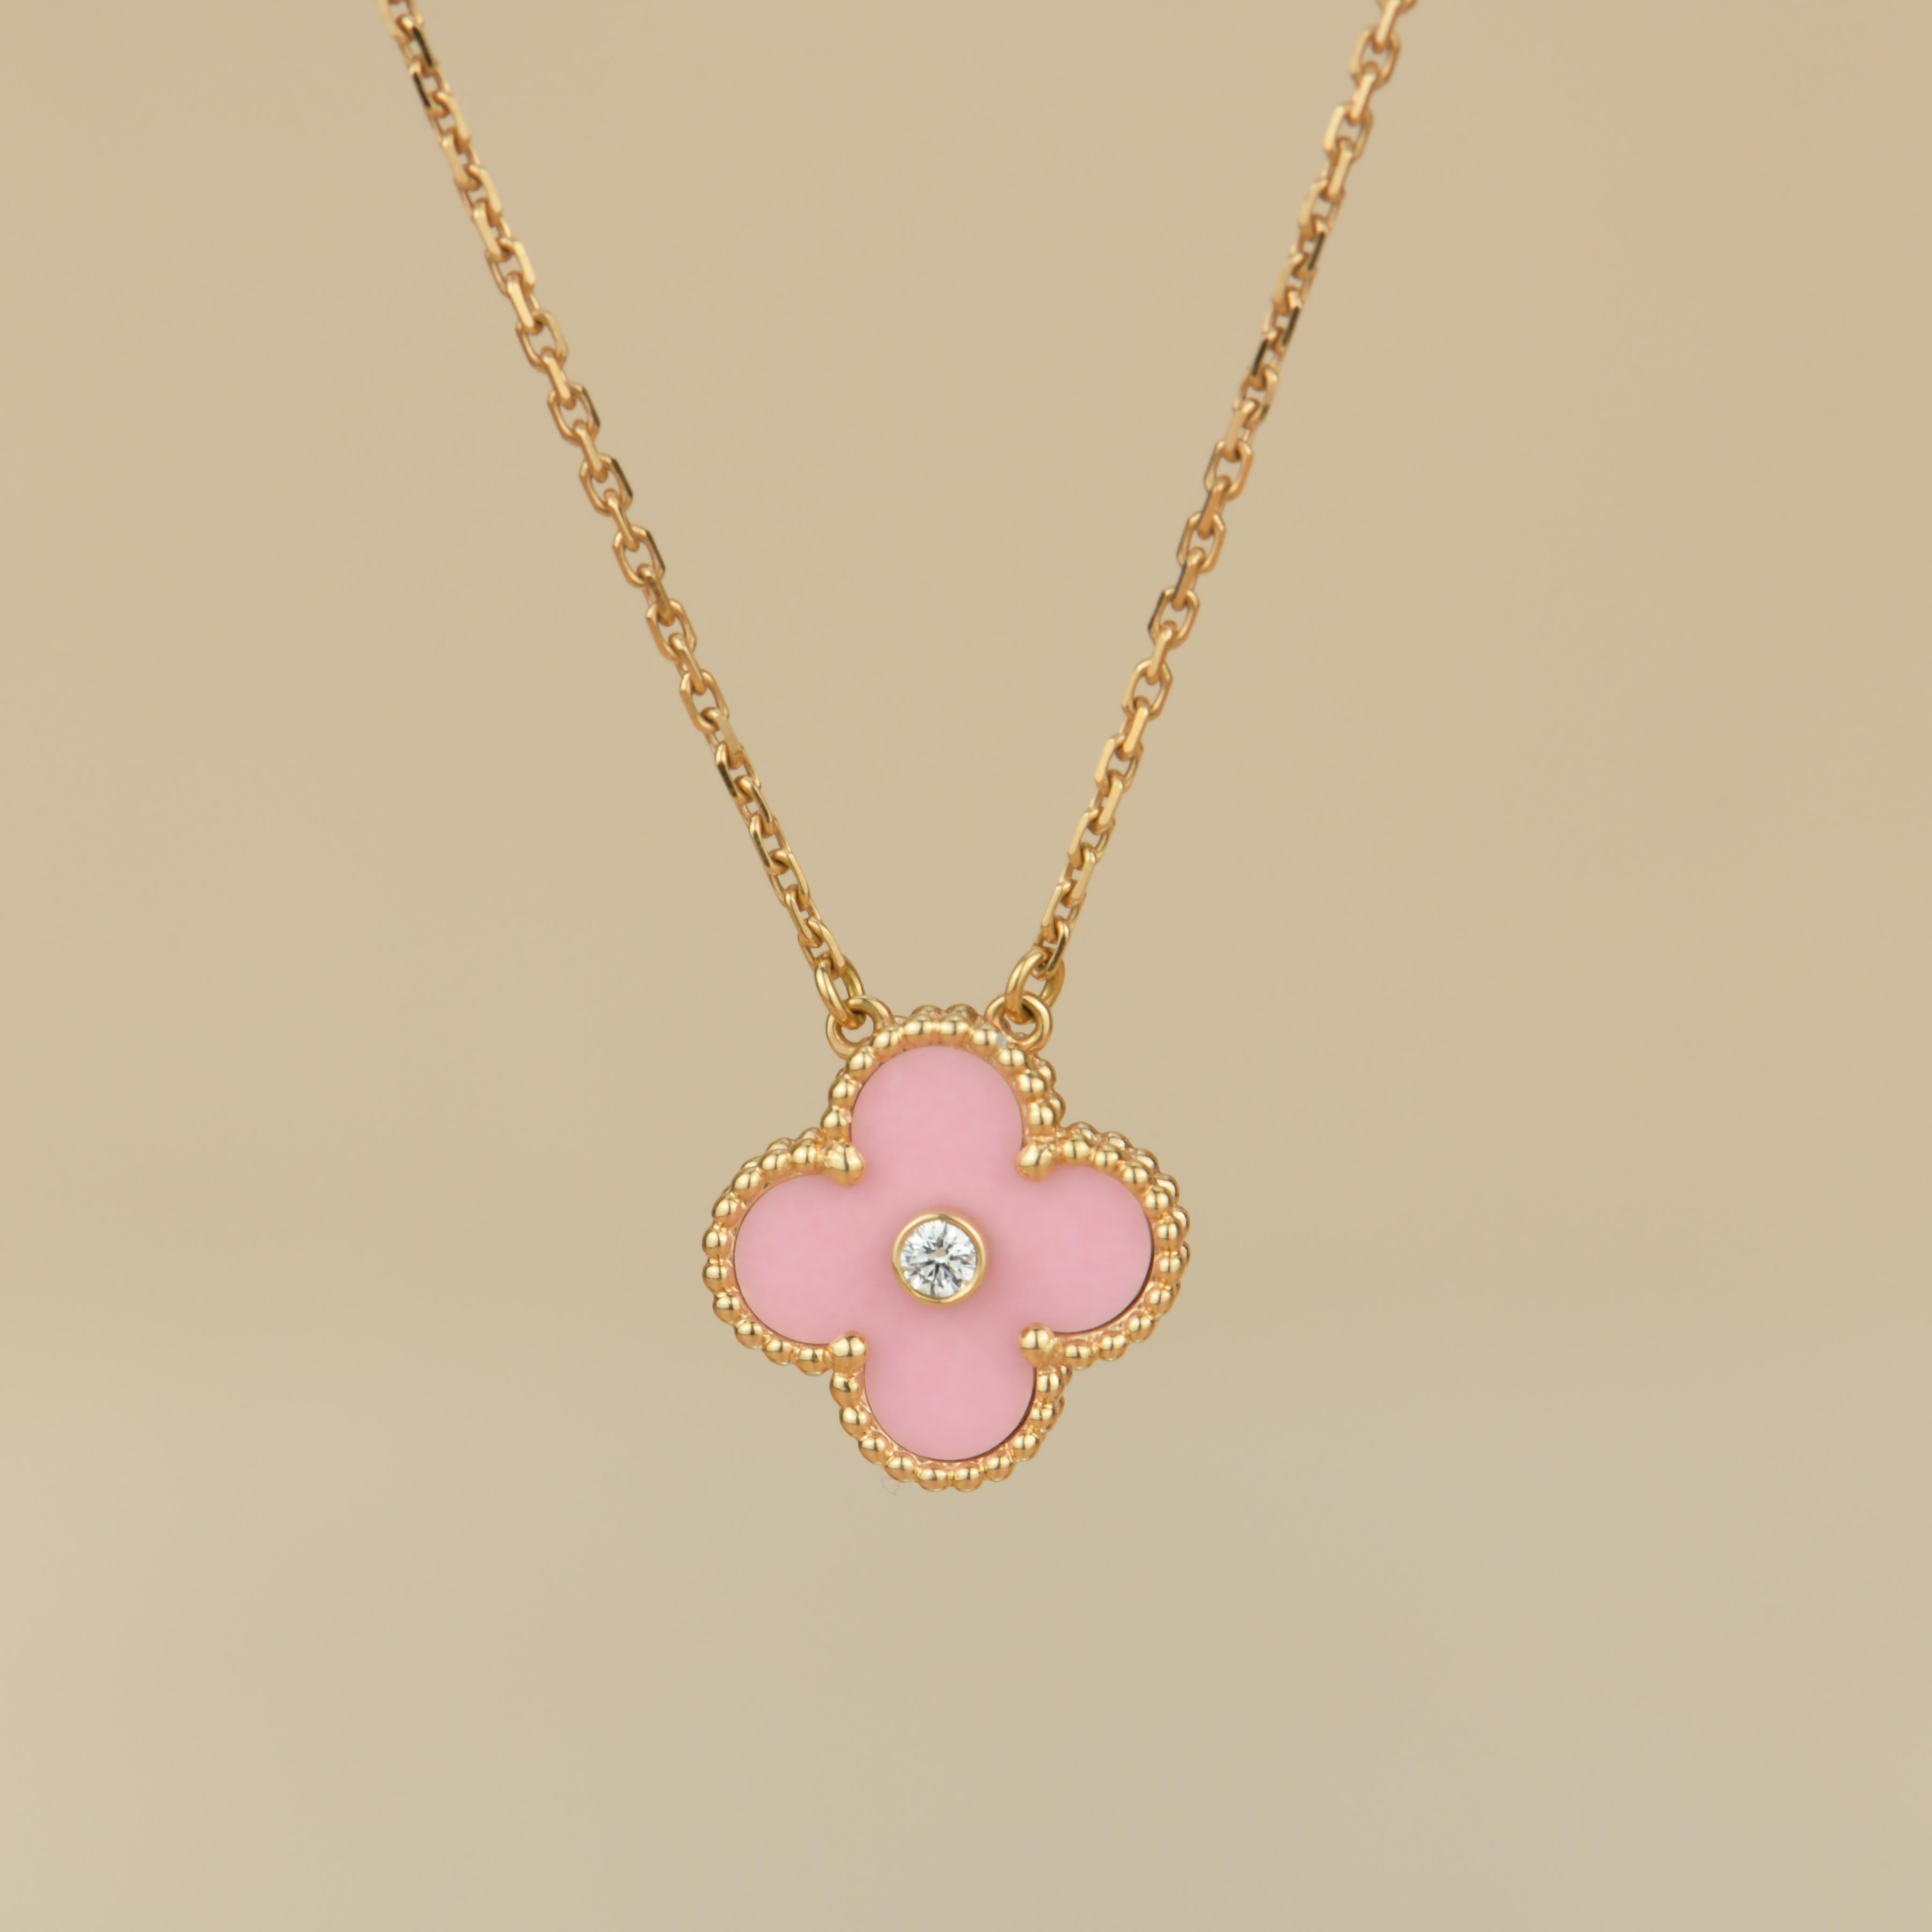 18K Rose Gold Limited Edition Alhambra Diamond And Pink Porcelain Necklace was released in 2015 Christmas as the holiday pendant. VCA doesn't create this version anymore, a truly collective piece!

Dandelion Antiques Code	AT-0849
Brand	             